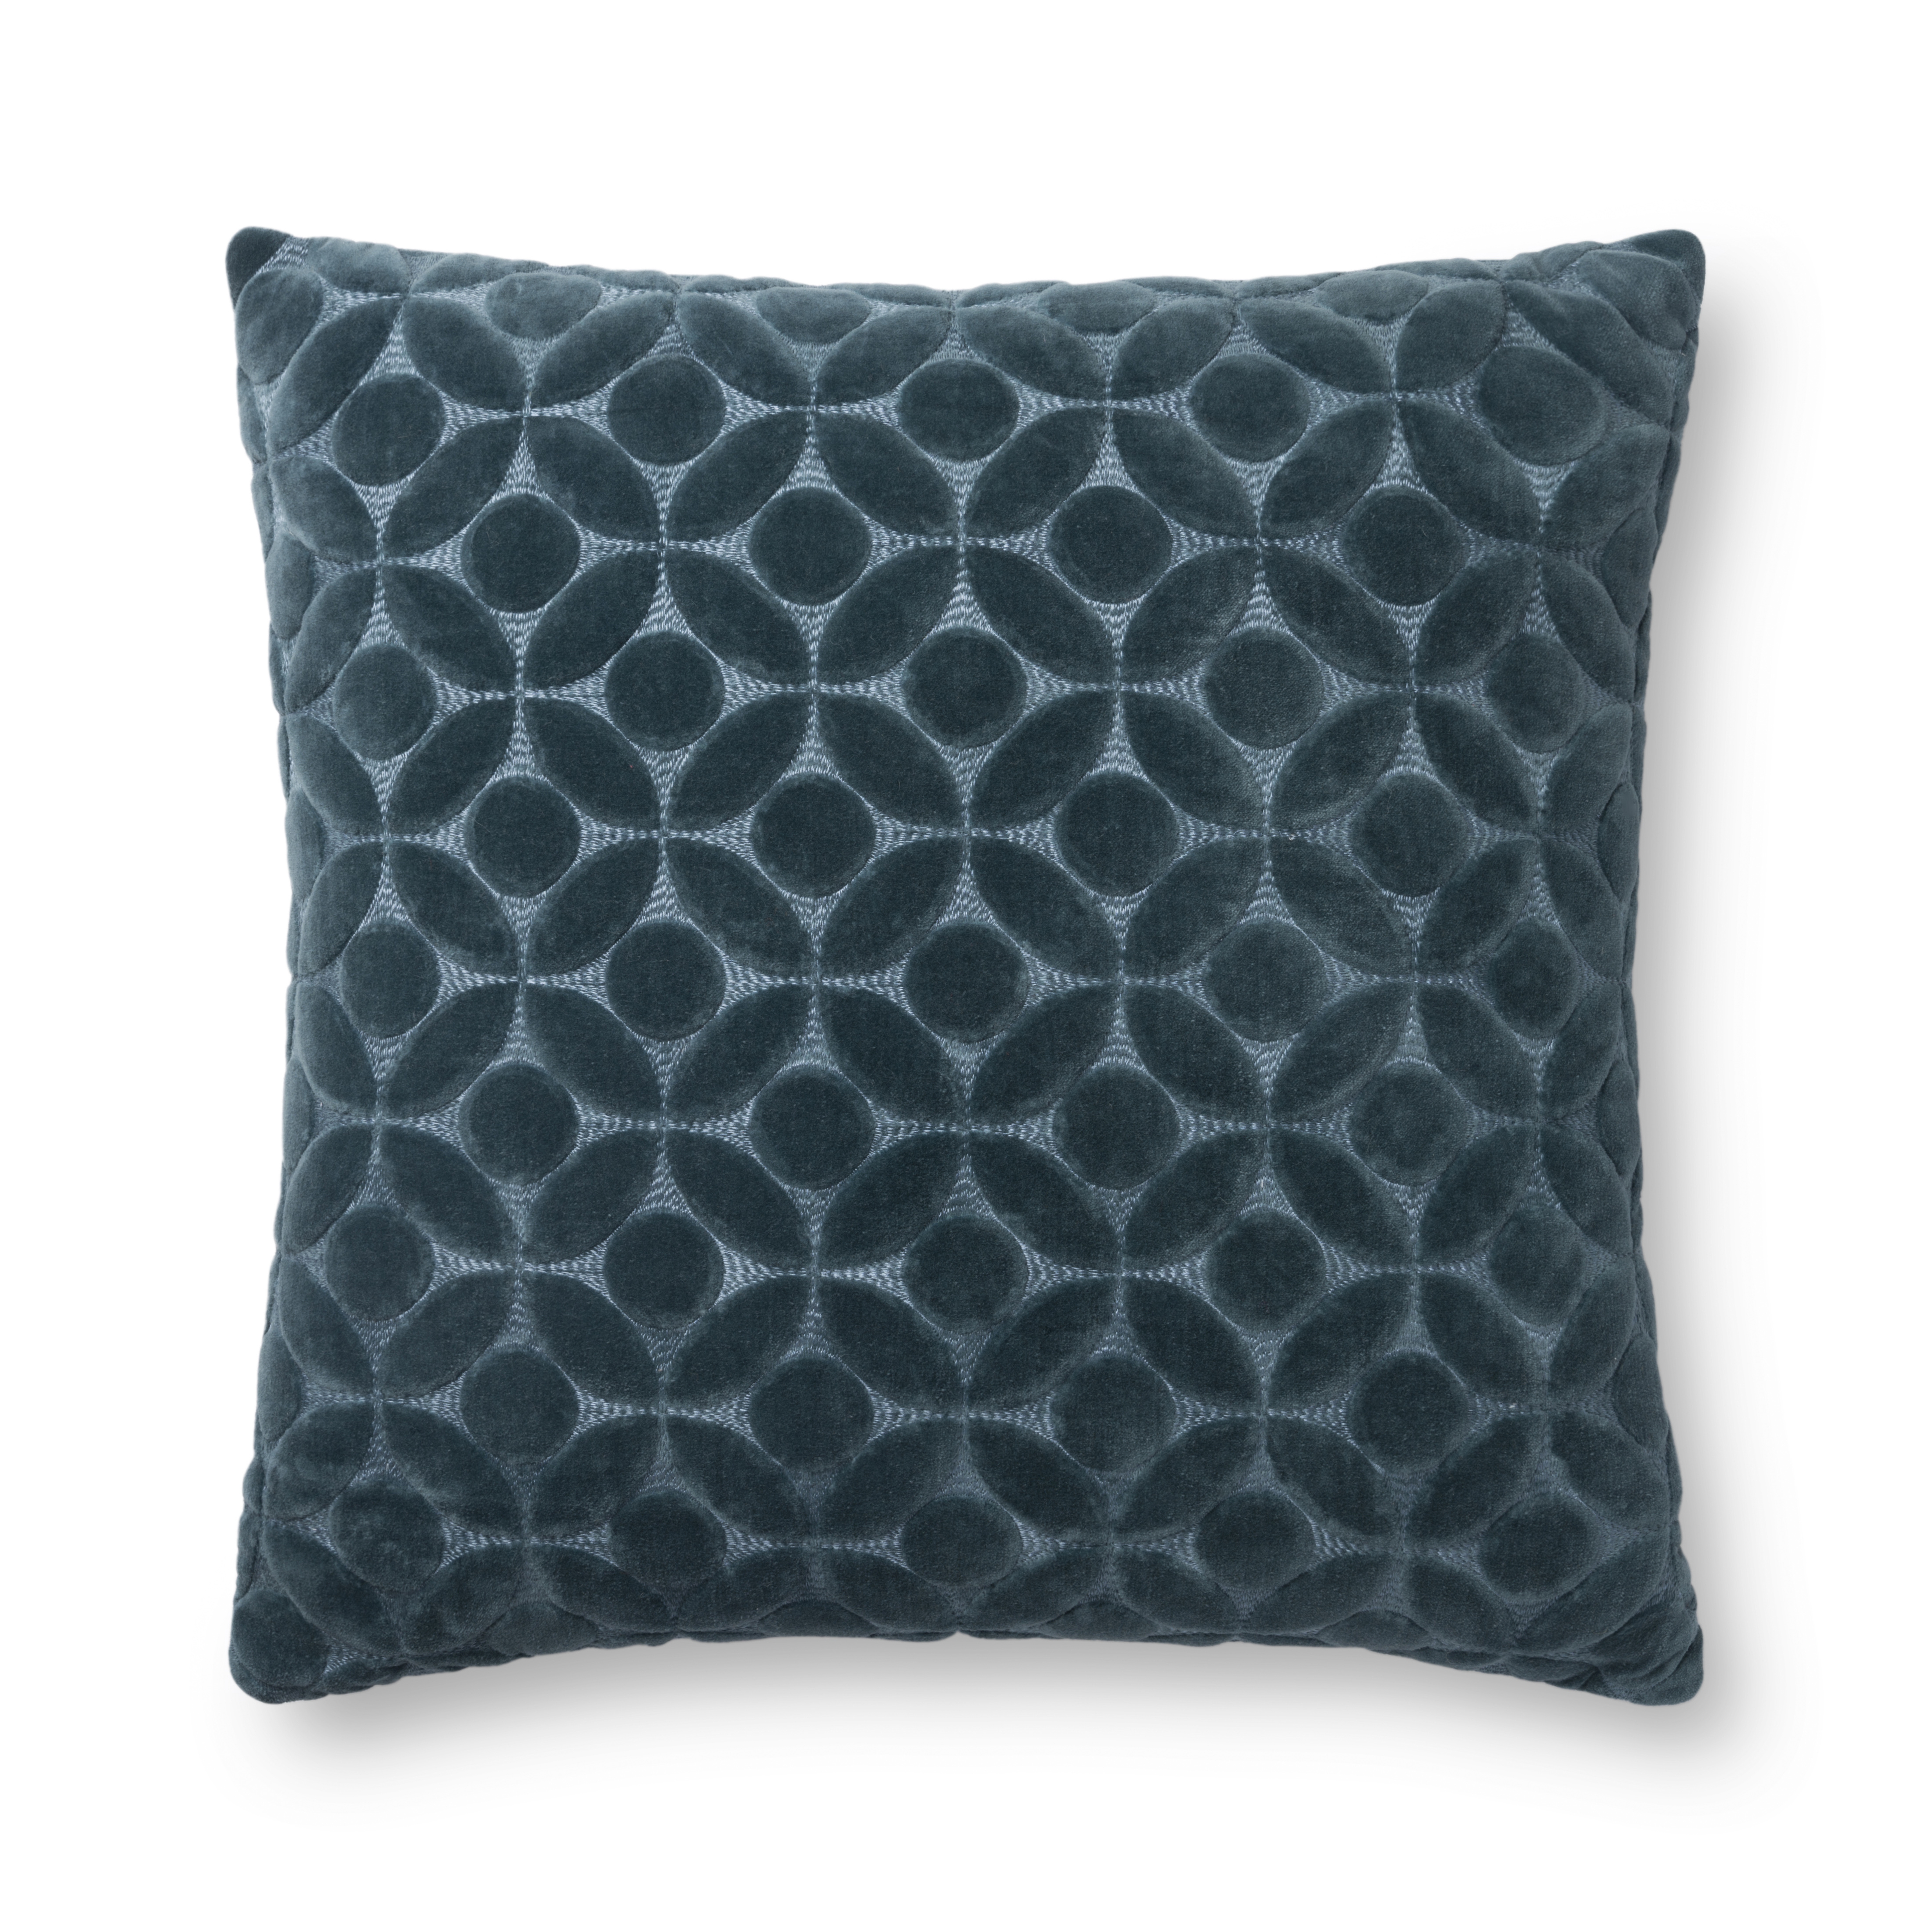 Loloi PILLOWS P0864 Teal 22" x 22" Cover Only - Loloi Rugs